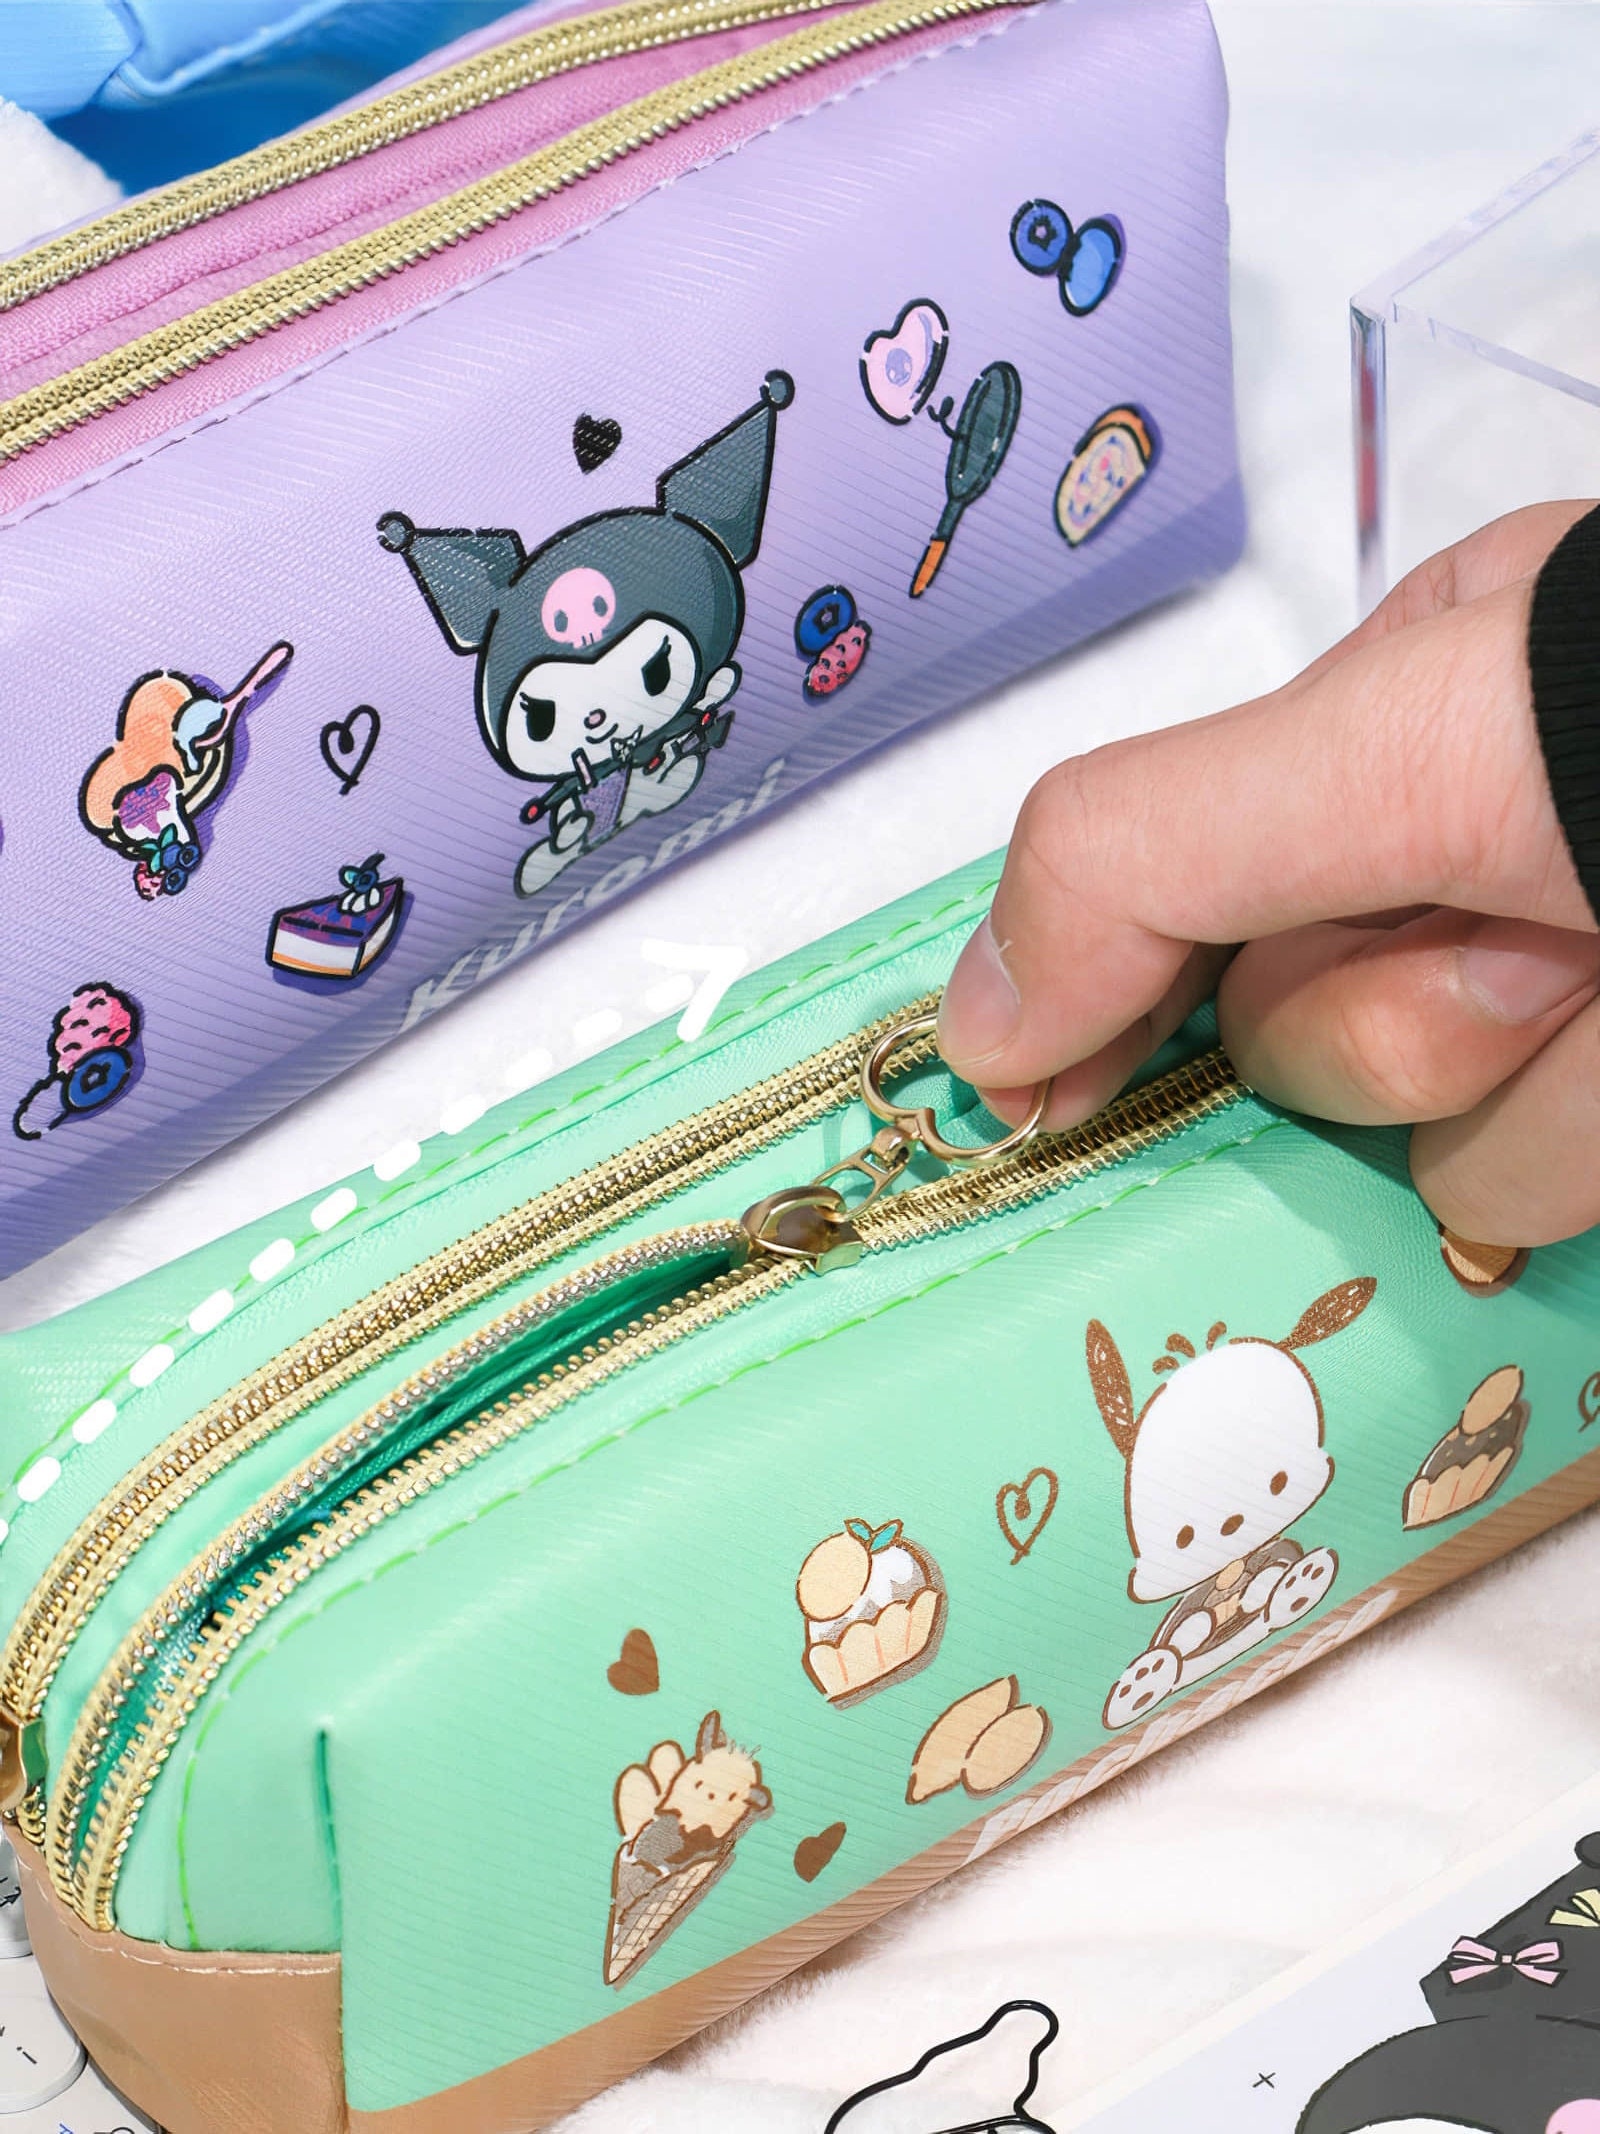 Bella Globe Convertible Vertical Stand Up Cute Pencil Case Box with Decoration Holes for Personalized Anime Cartoon Collectibles on Kawaii Pencil Bag Pouch for